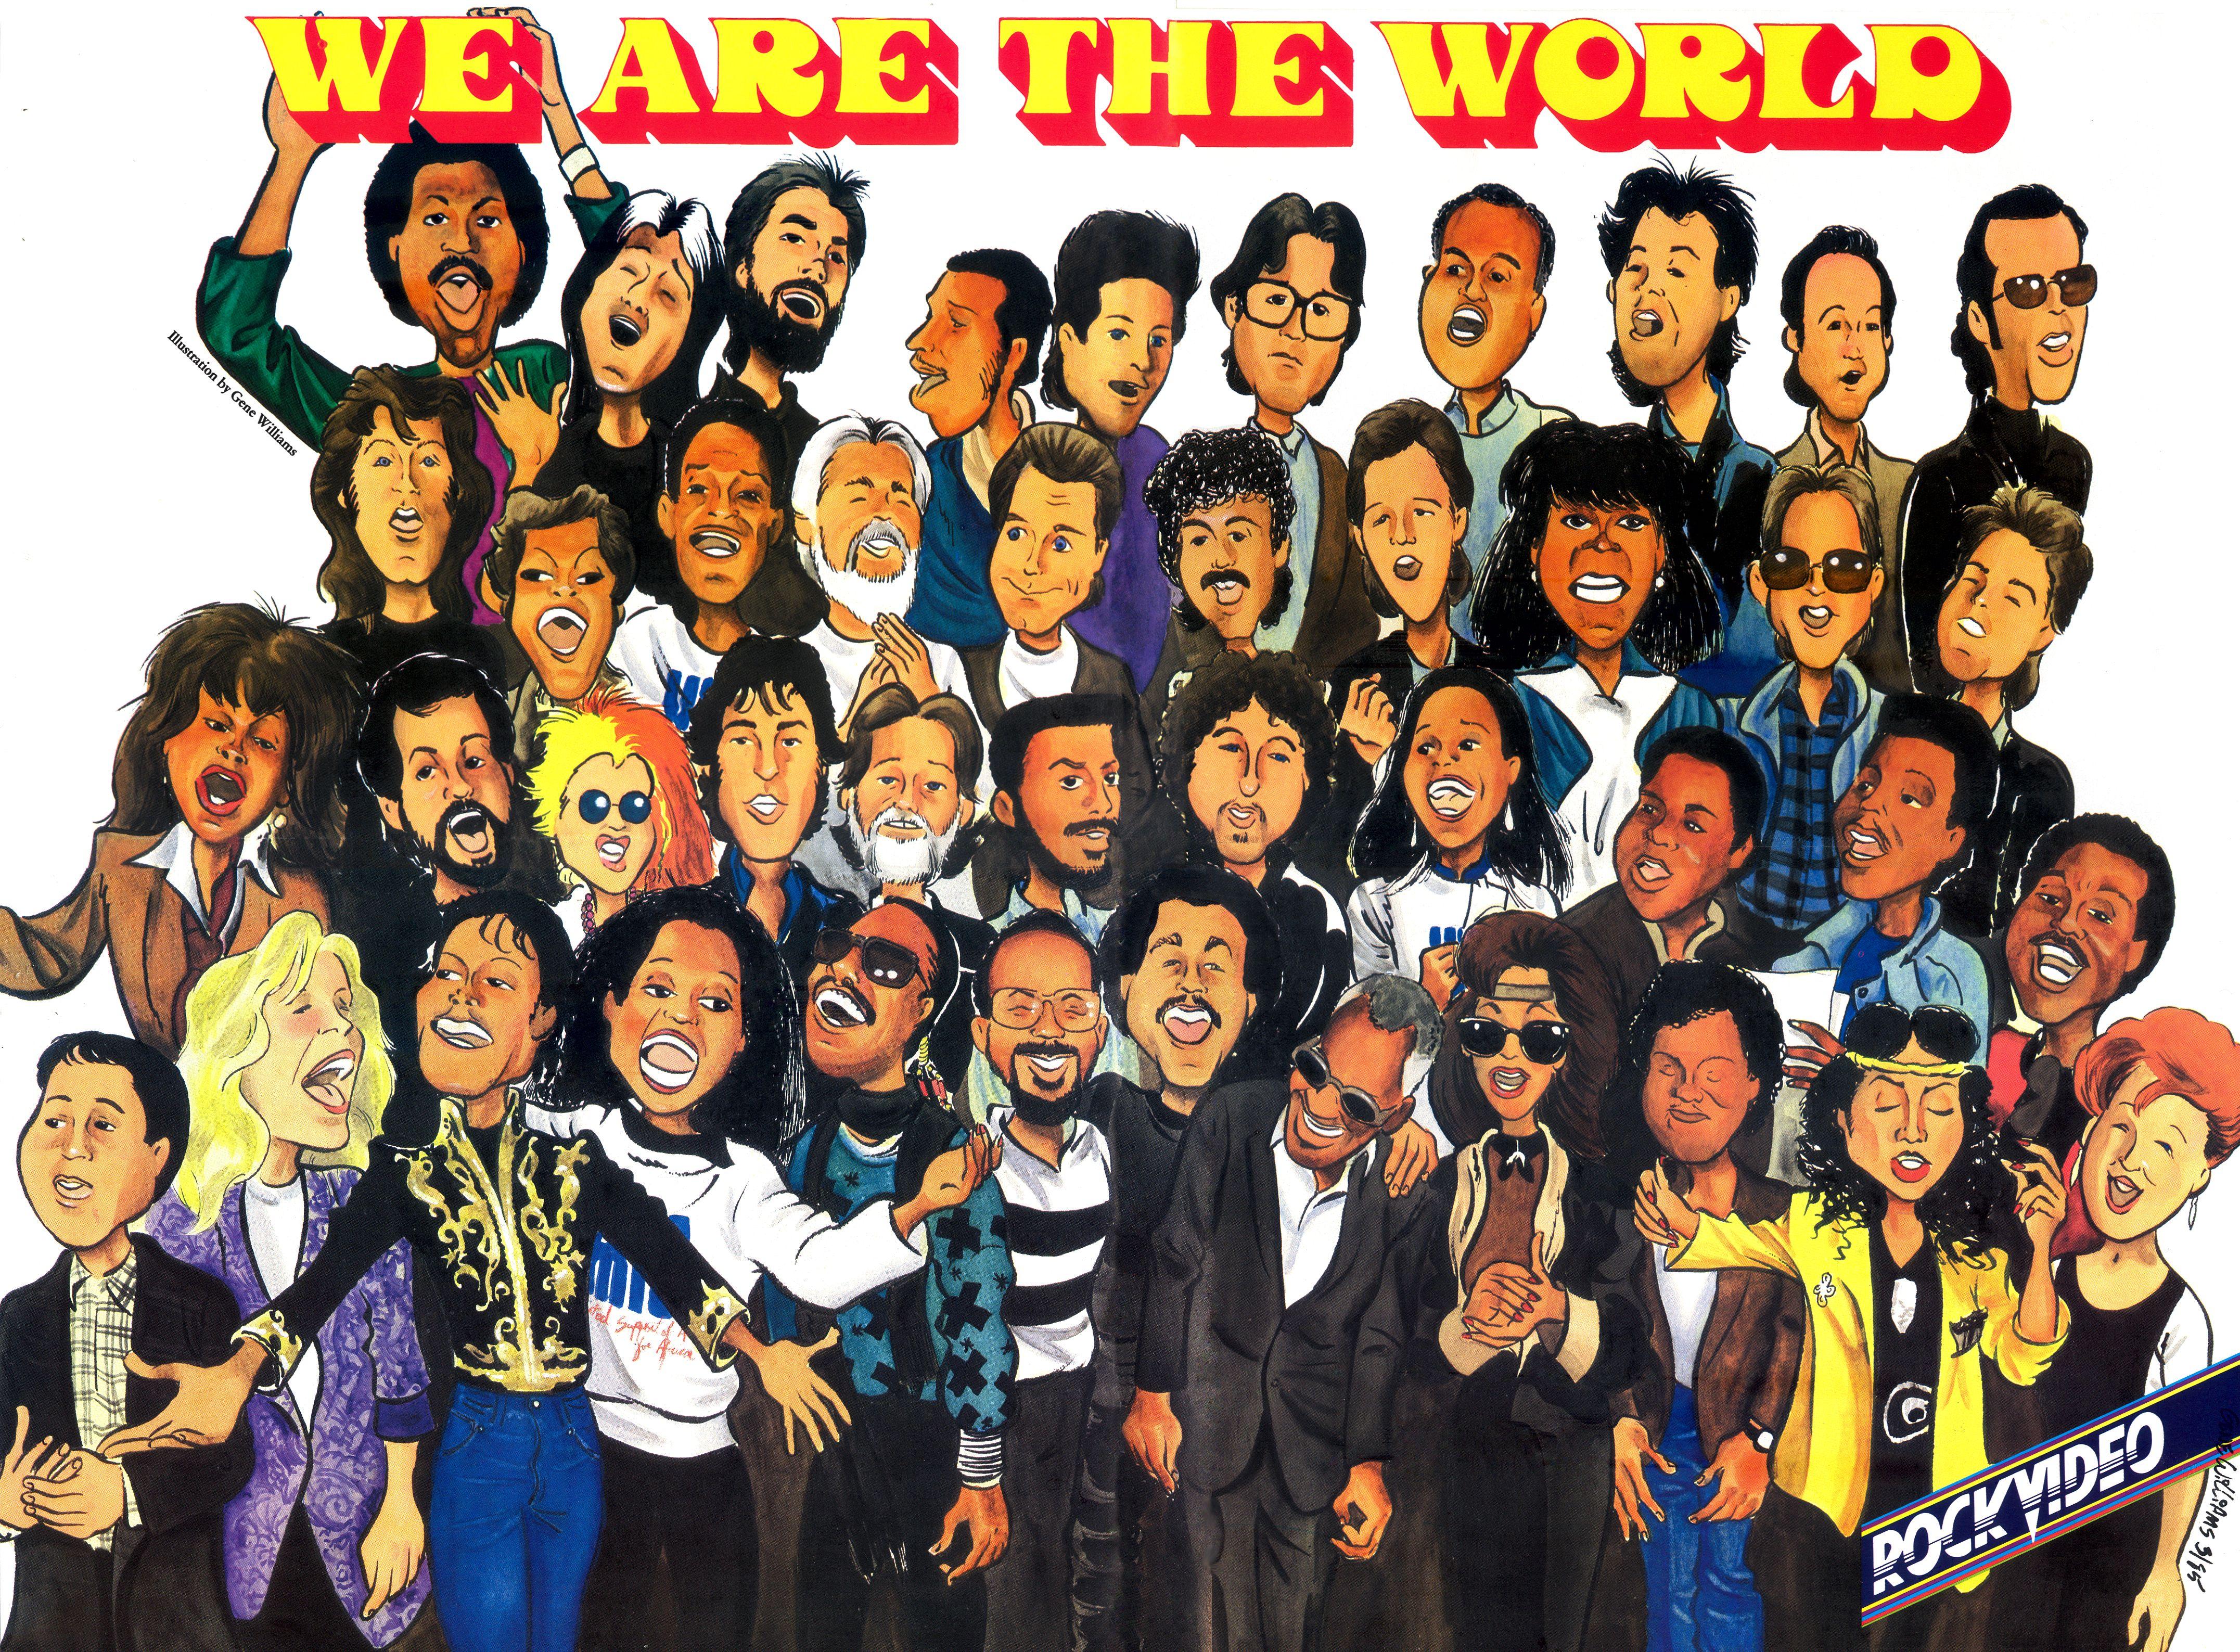 We Are the World Logo - WE ARE THE WORLD' CARTOON POSTER – Rock Video Magazine | THE COMIC ...